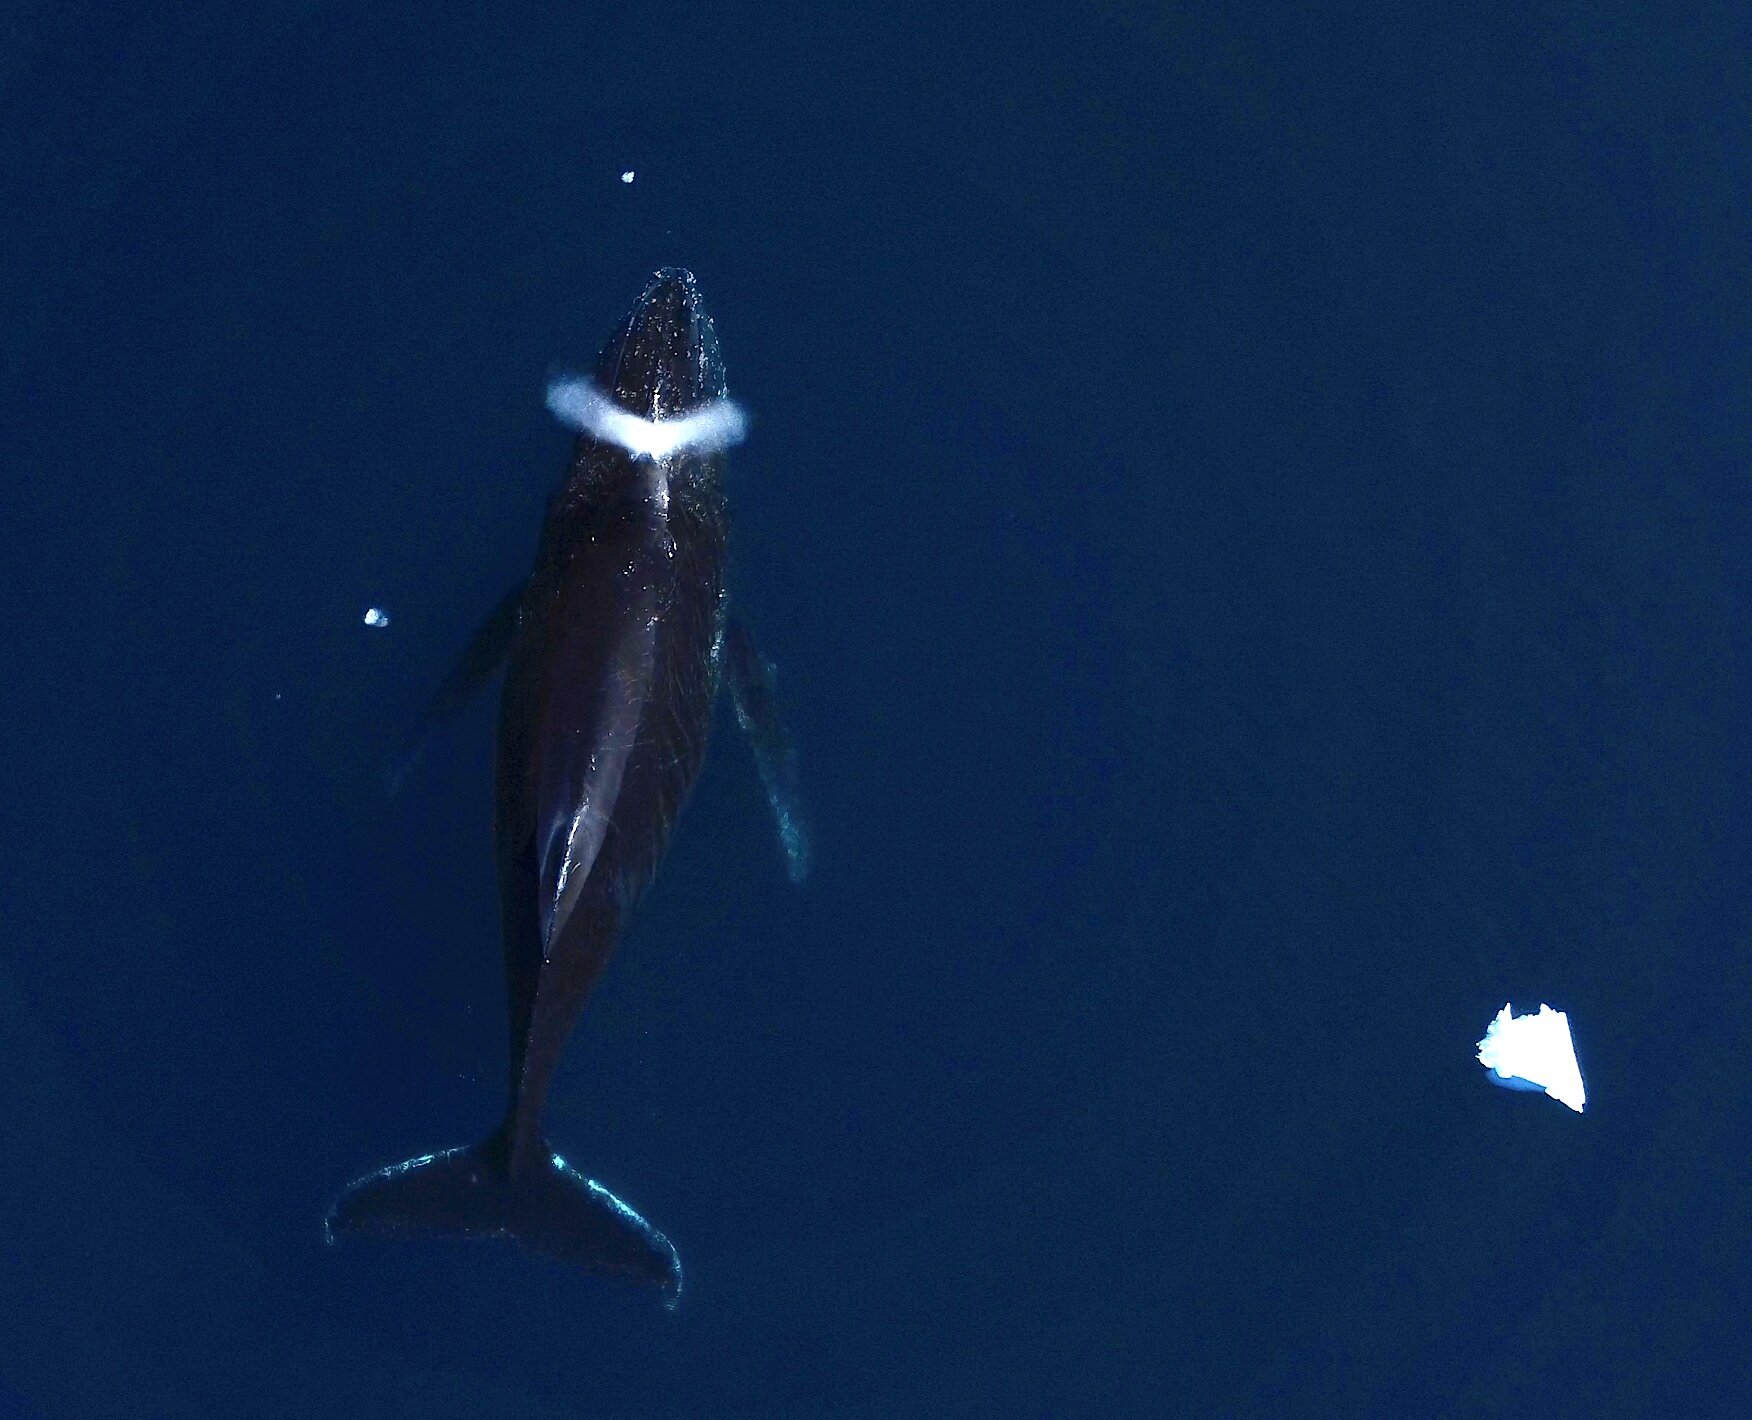 Don't count on whales as 'climate savers,' says study